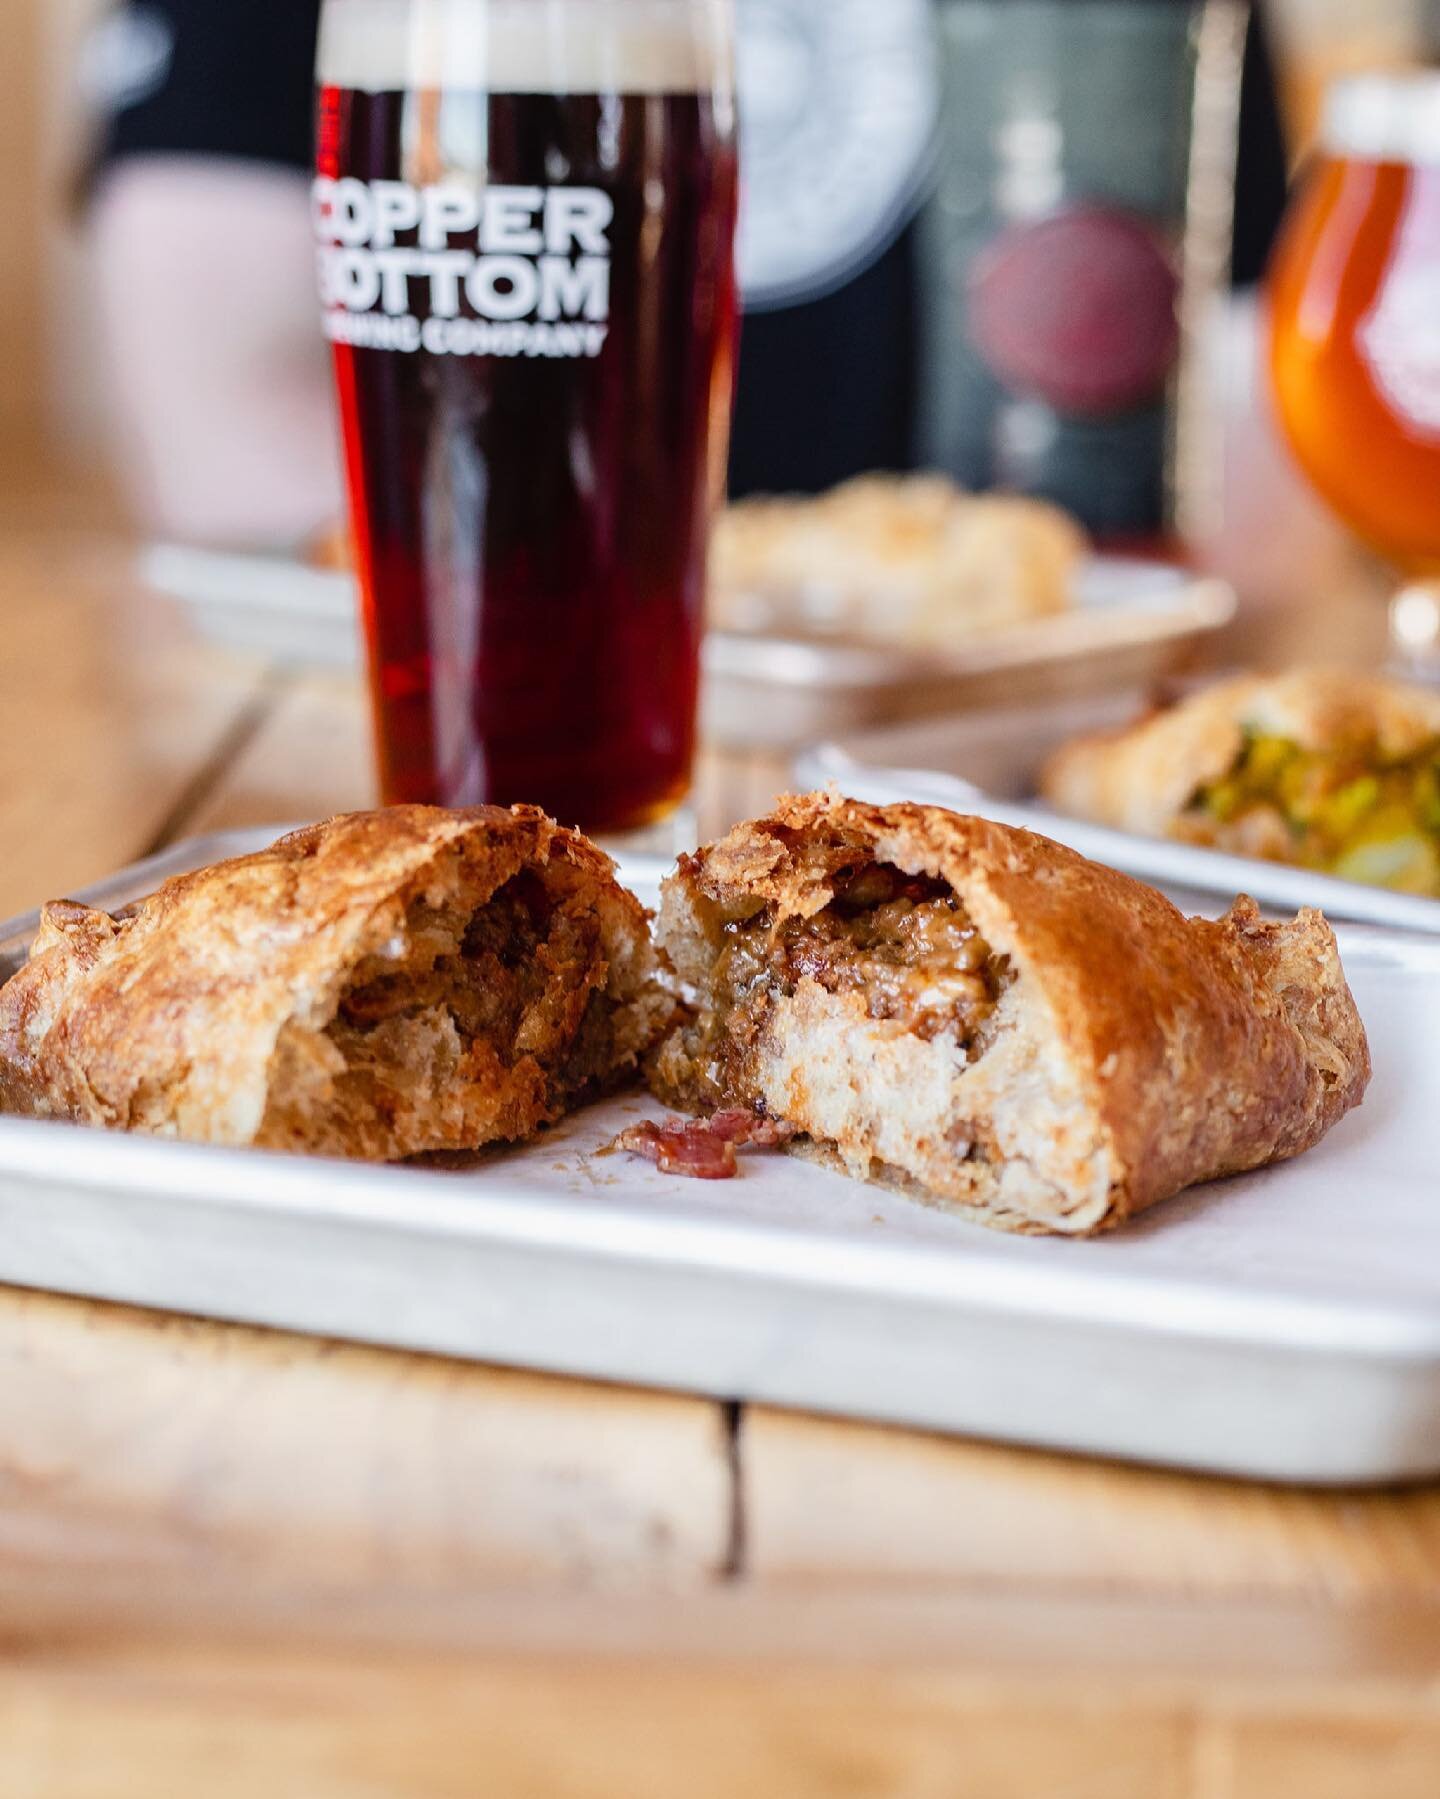 Starting this week, we're offering a new daily special in the taproom! On Wednesdays, you can grab a pint and a Handpie of your choice for just $15. 

#HandpieHighFives